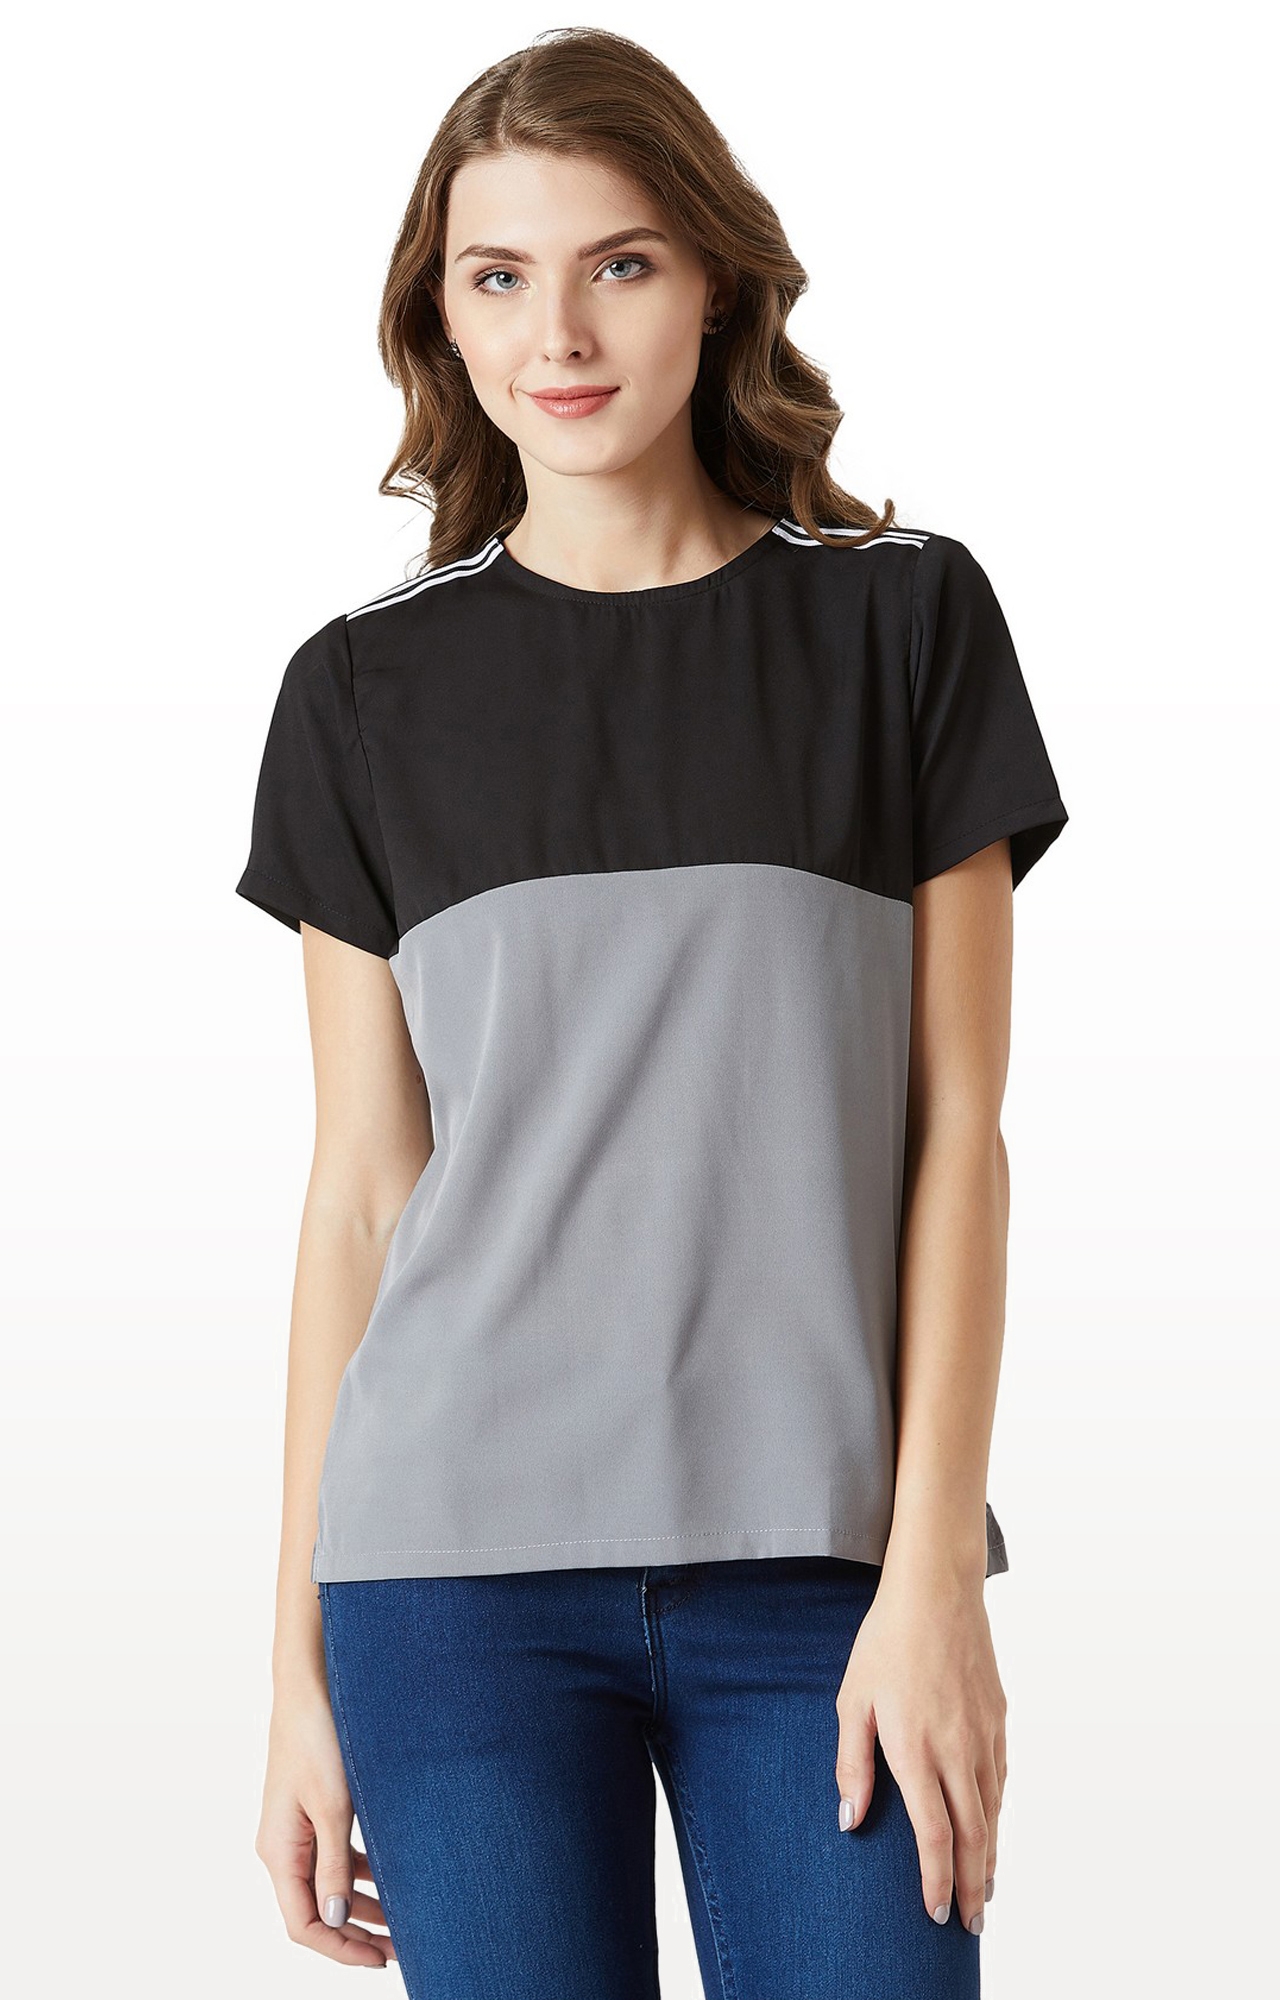 MISS CHASE | Black and Grey Colourblock Blouson Top